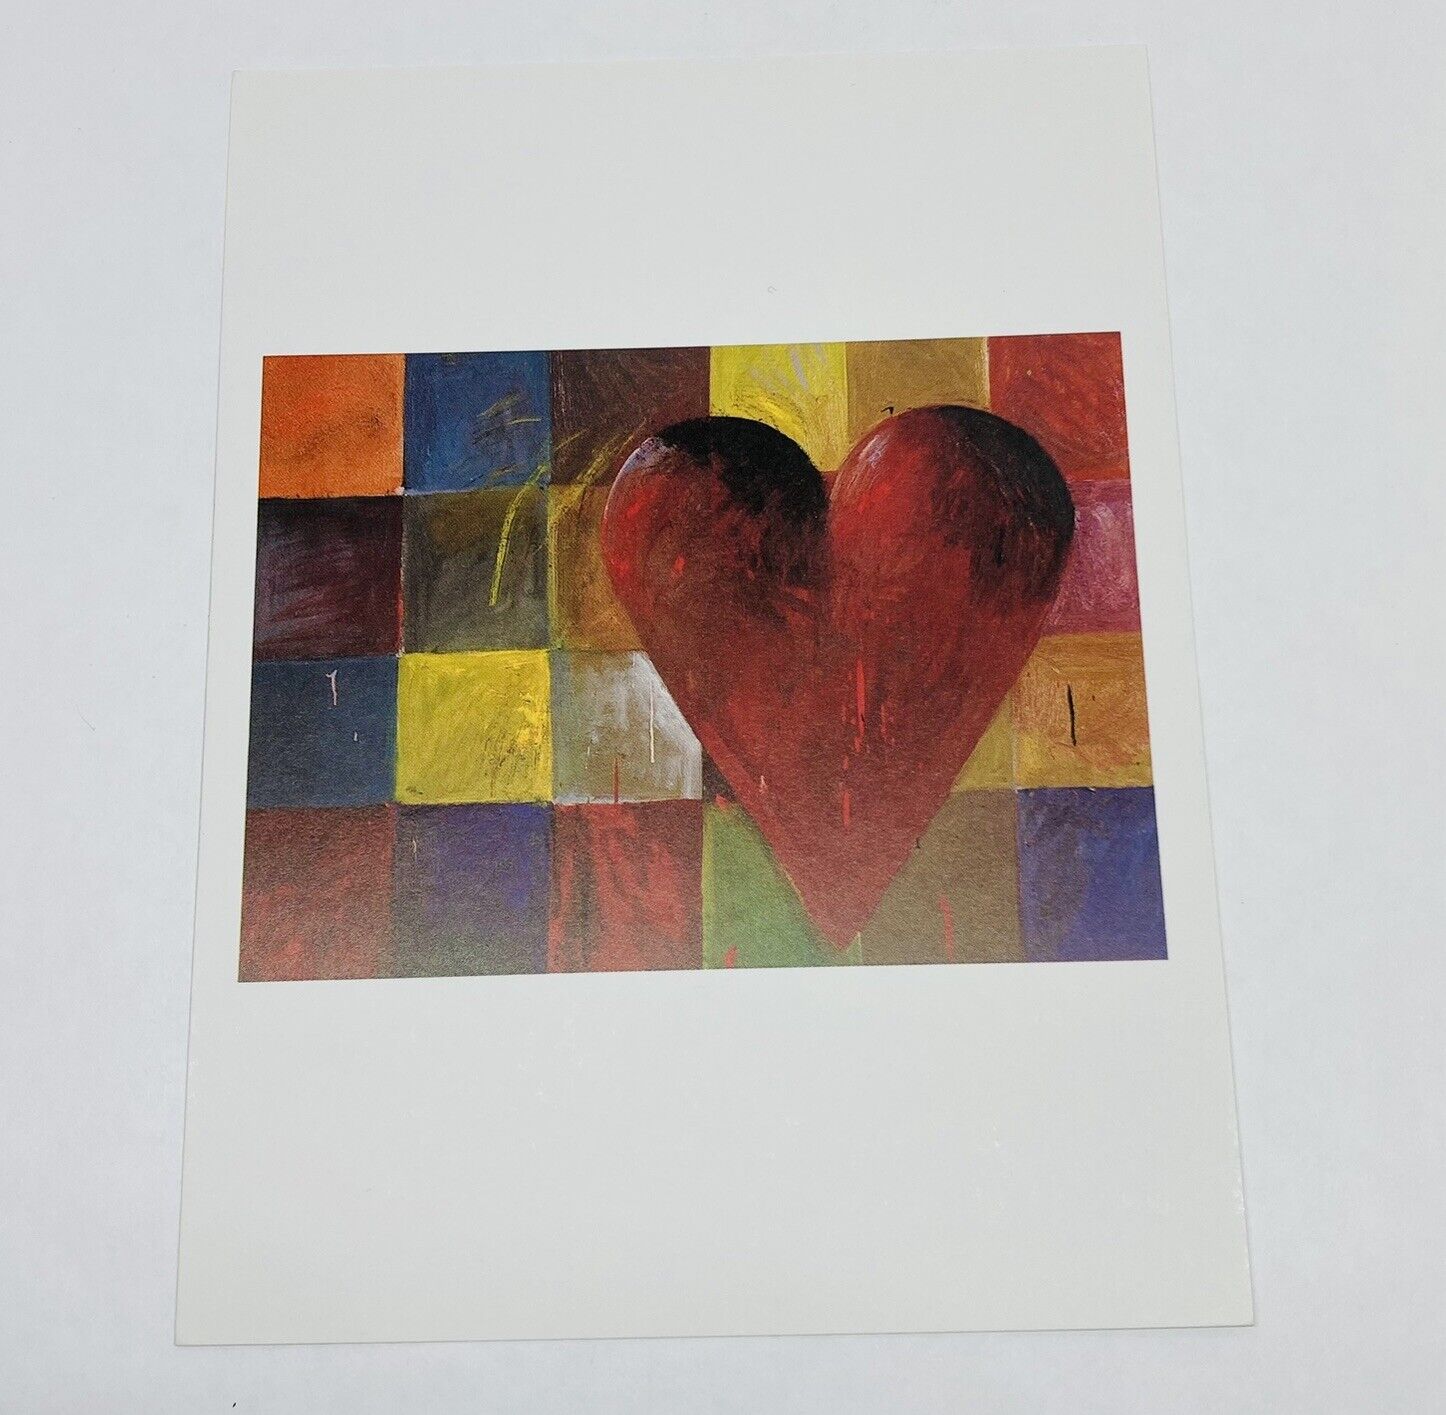 1998 Phaidon Press Postcard “My Name Is Jim Dine” Heart Patchwork Colorful P2